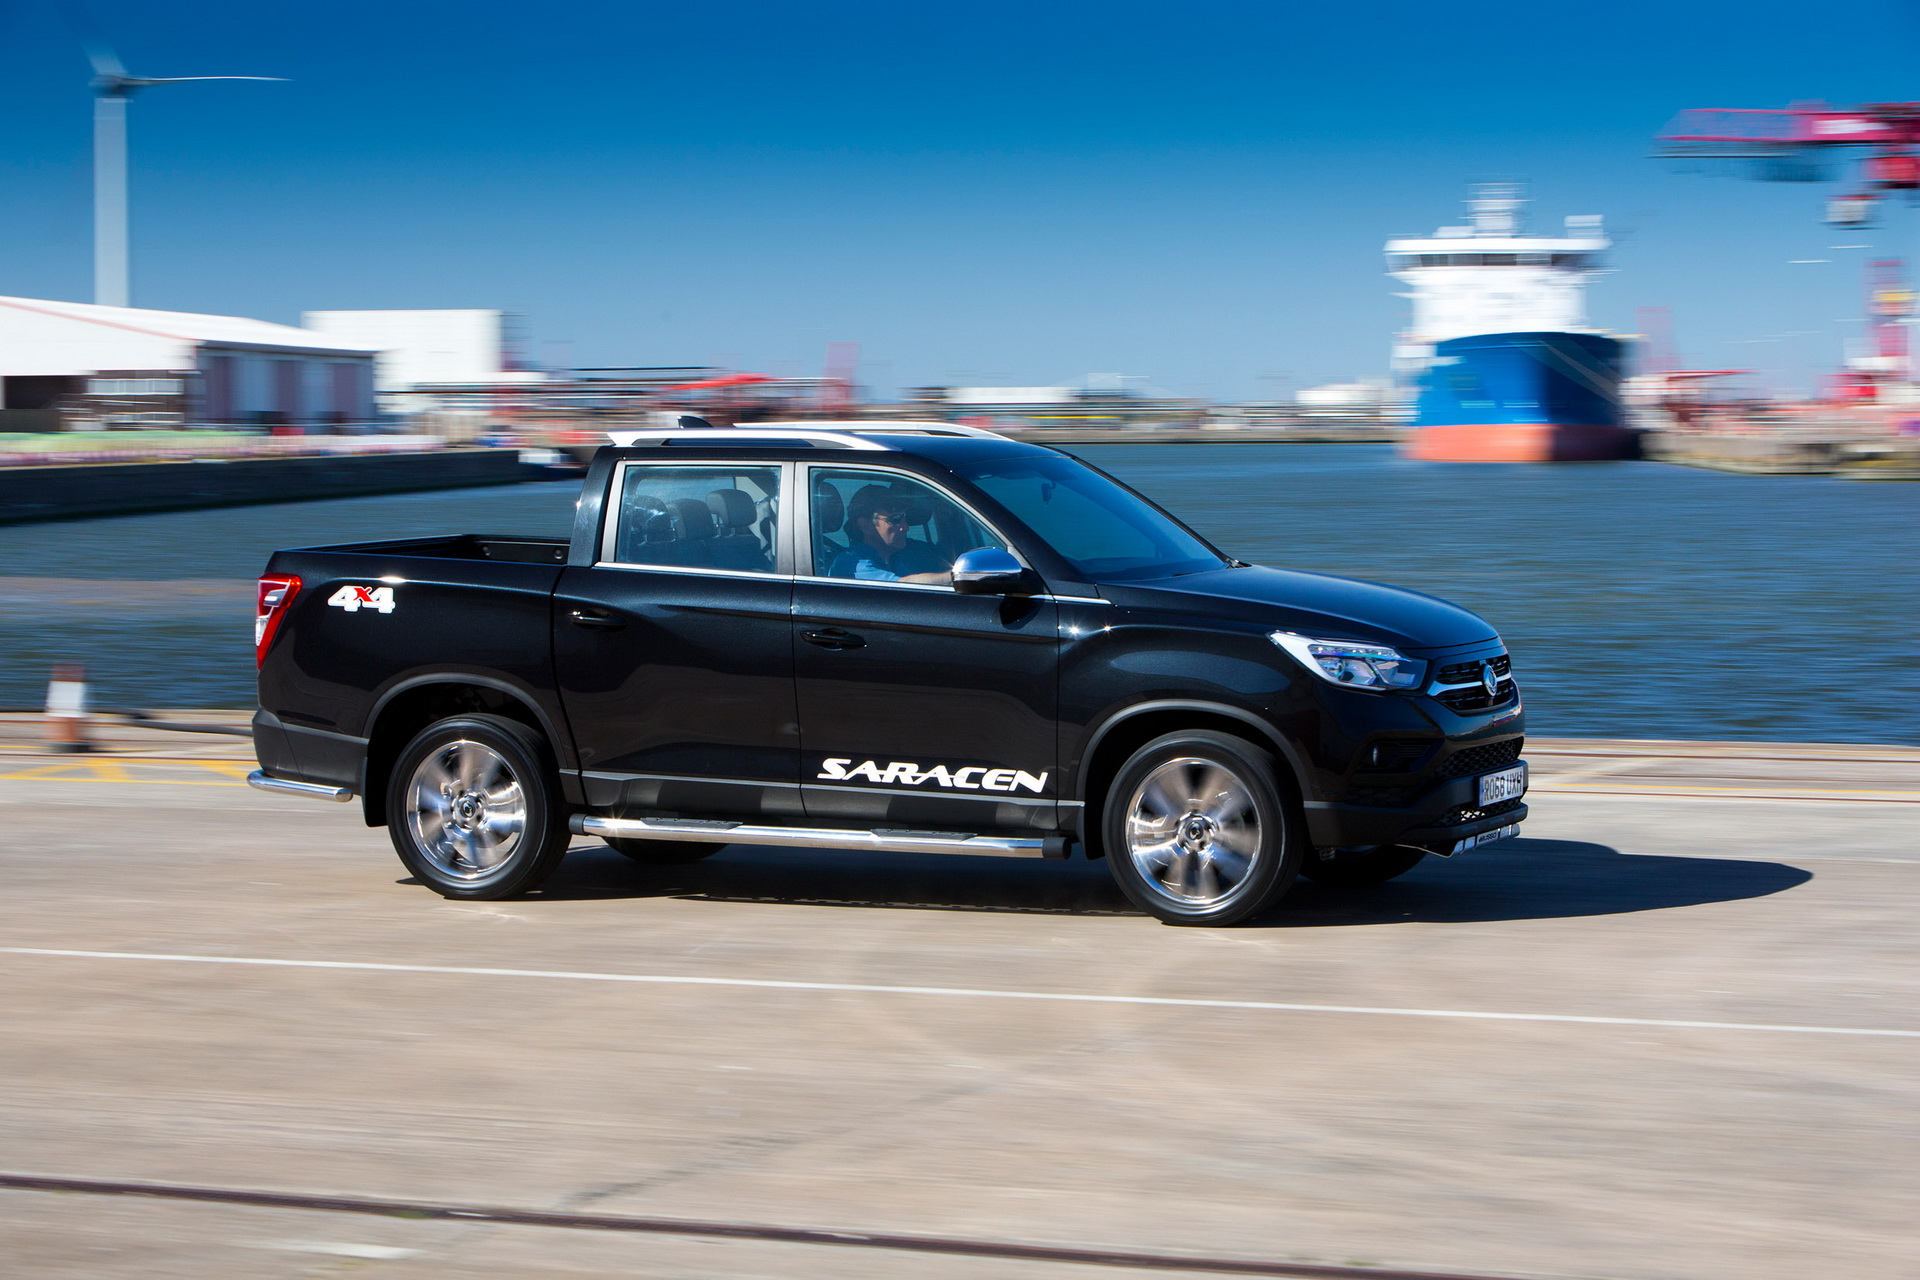 New Ssangyong Musso Pickup Priced From £19,995* In The UK | Carscoops